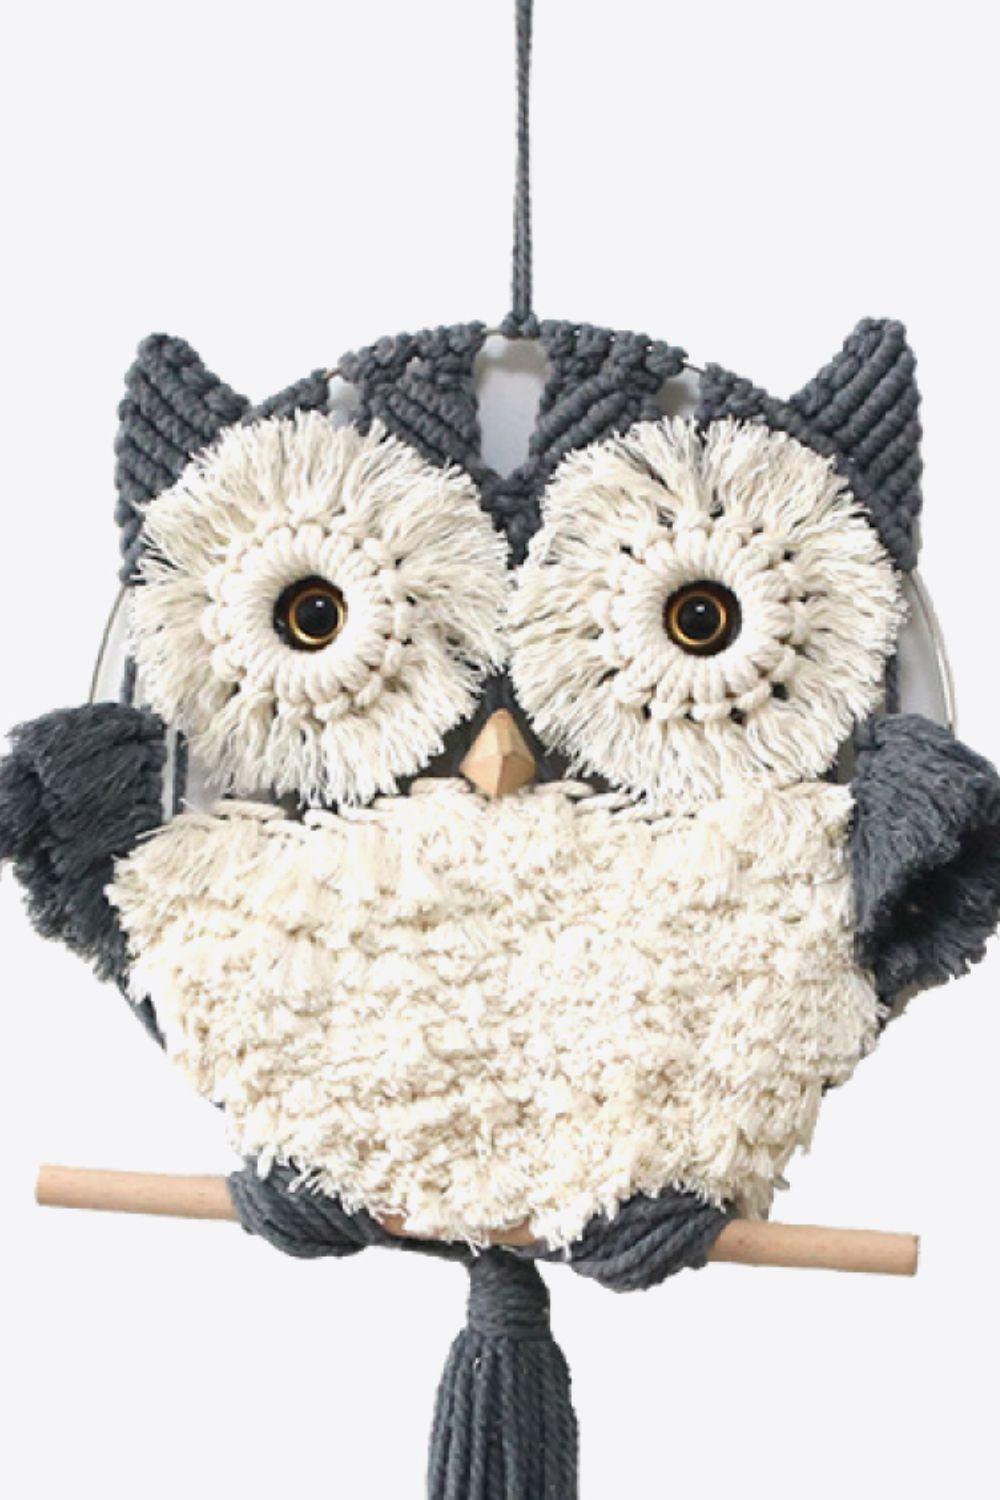 Hand-Woven Tassel Owl Macrame Wall Hanging - Crazy Like a Daisy Boutique #